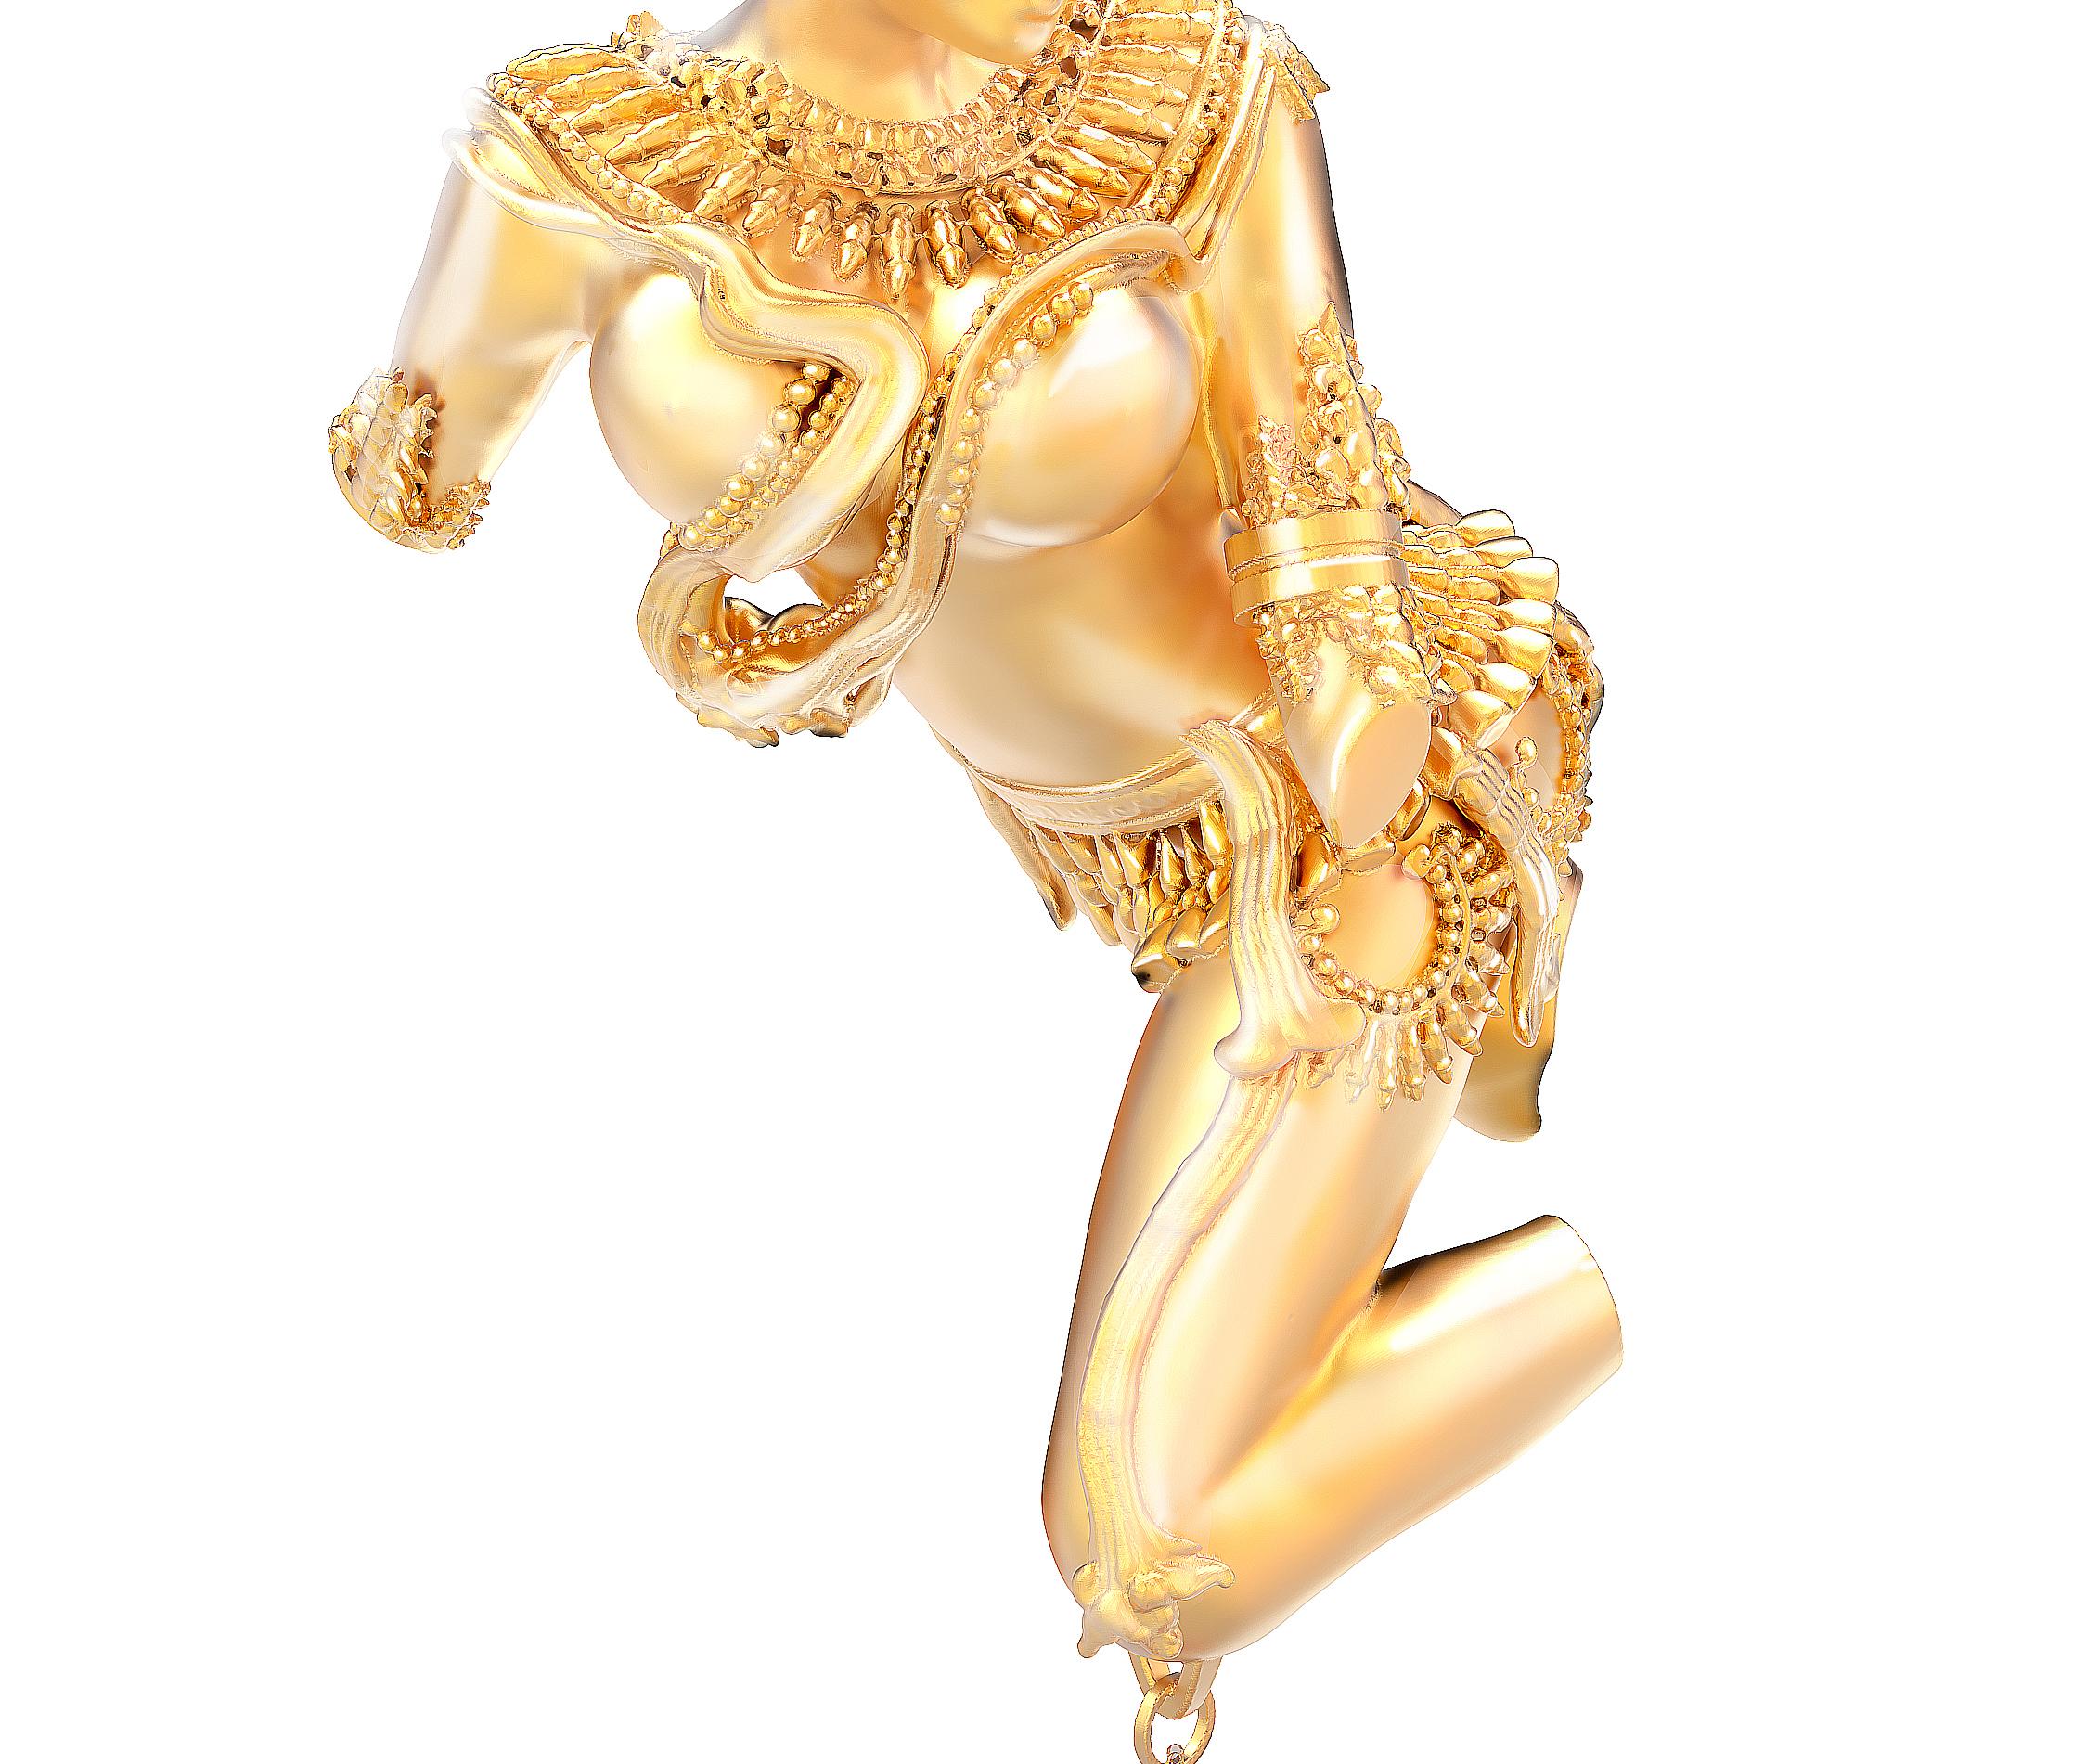 This Celestial Dancer Devata pendant necklace is made of 18 karat yellow gold and sterling silver with a cushion mandarin red spessartine weighing 3.1 carats, a pear-cut Malaya garnet weighing 1.1 carats, and 7 small diamonds. The goddess is crafted